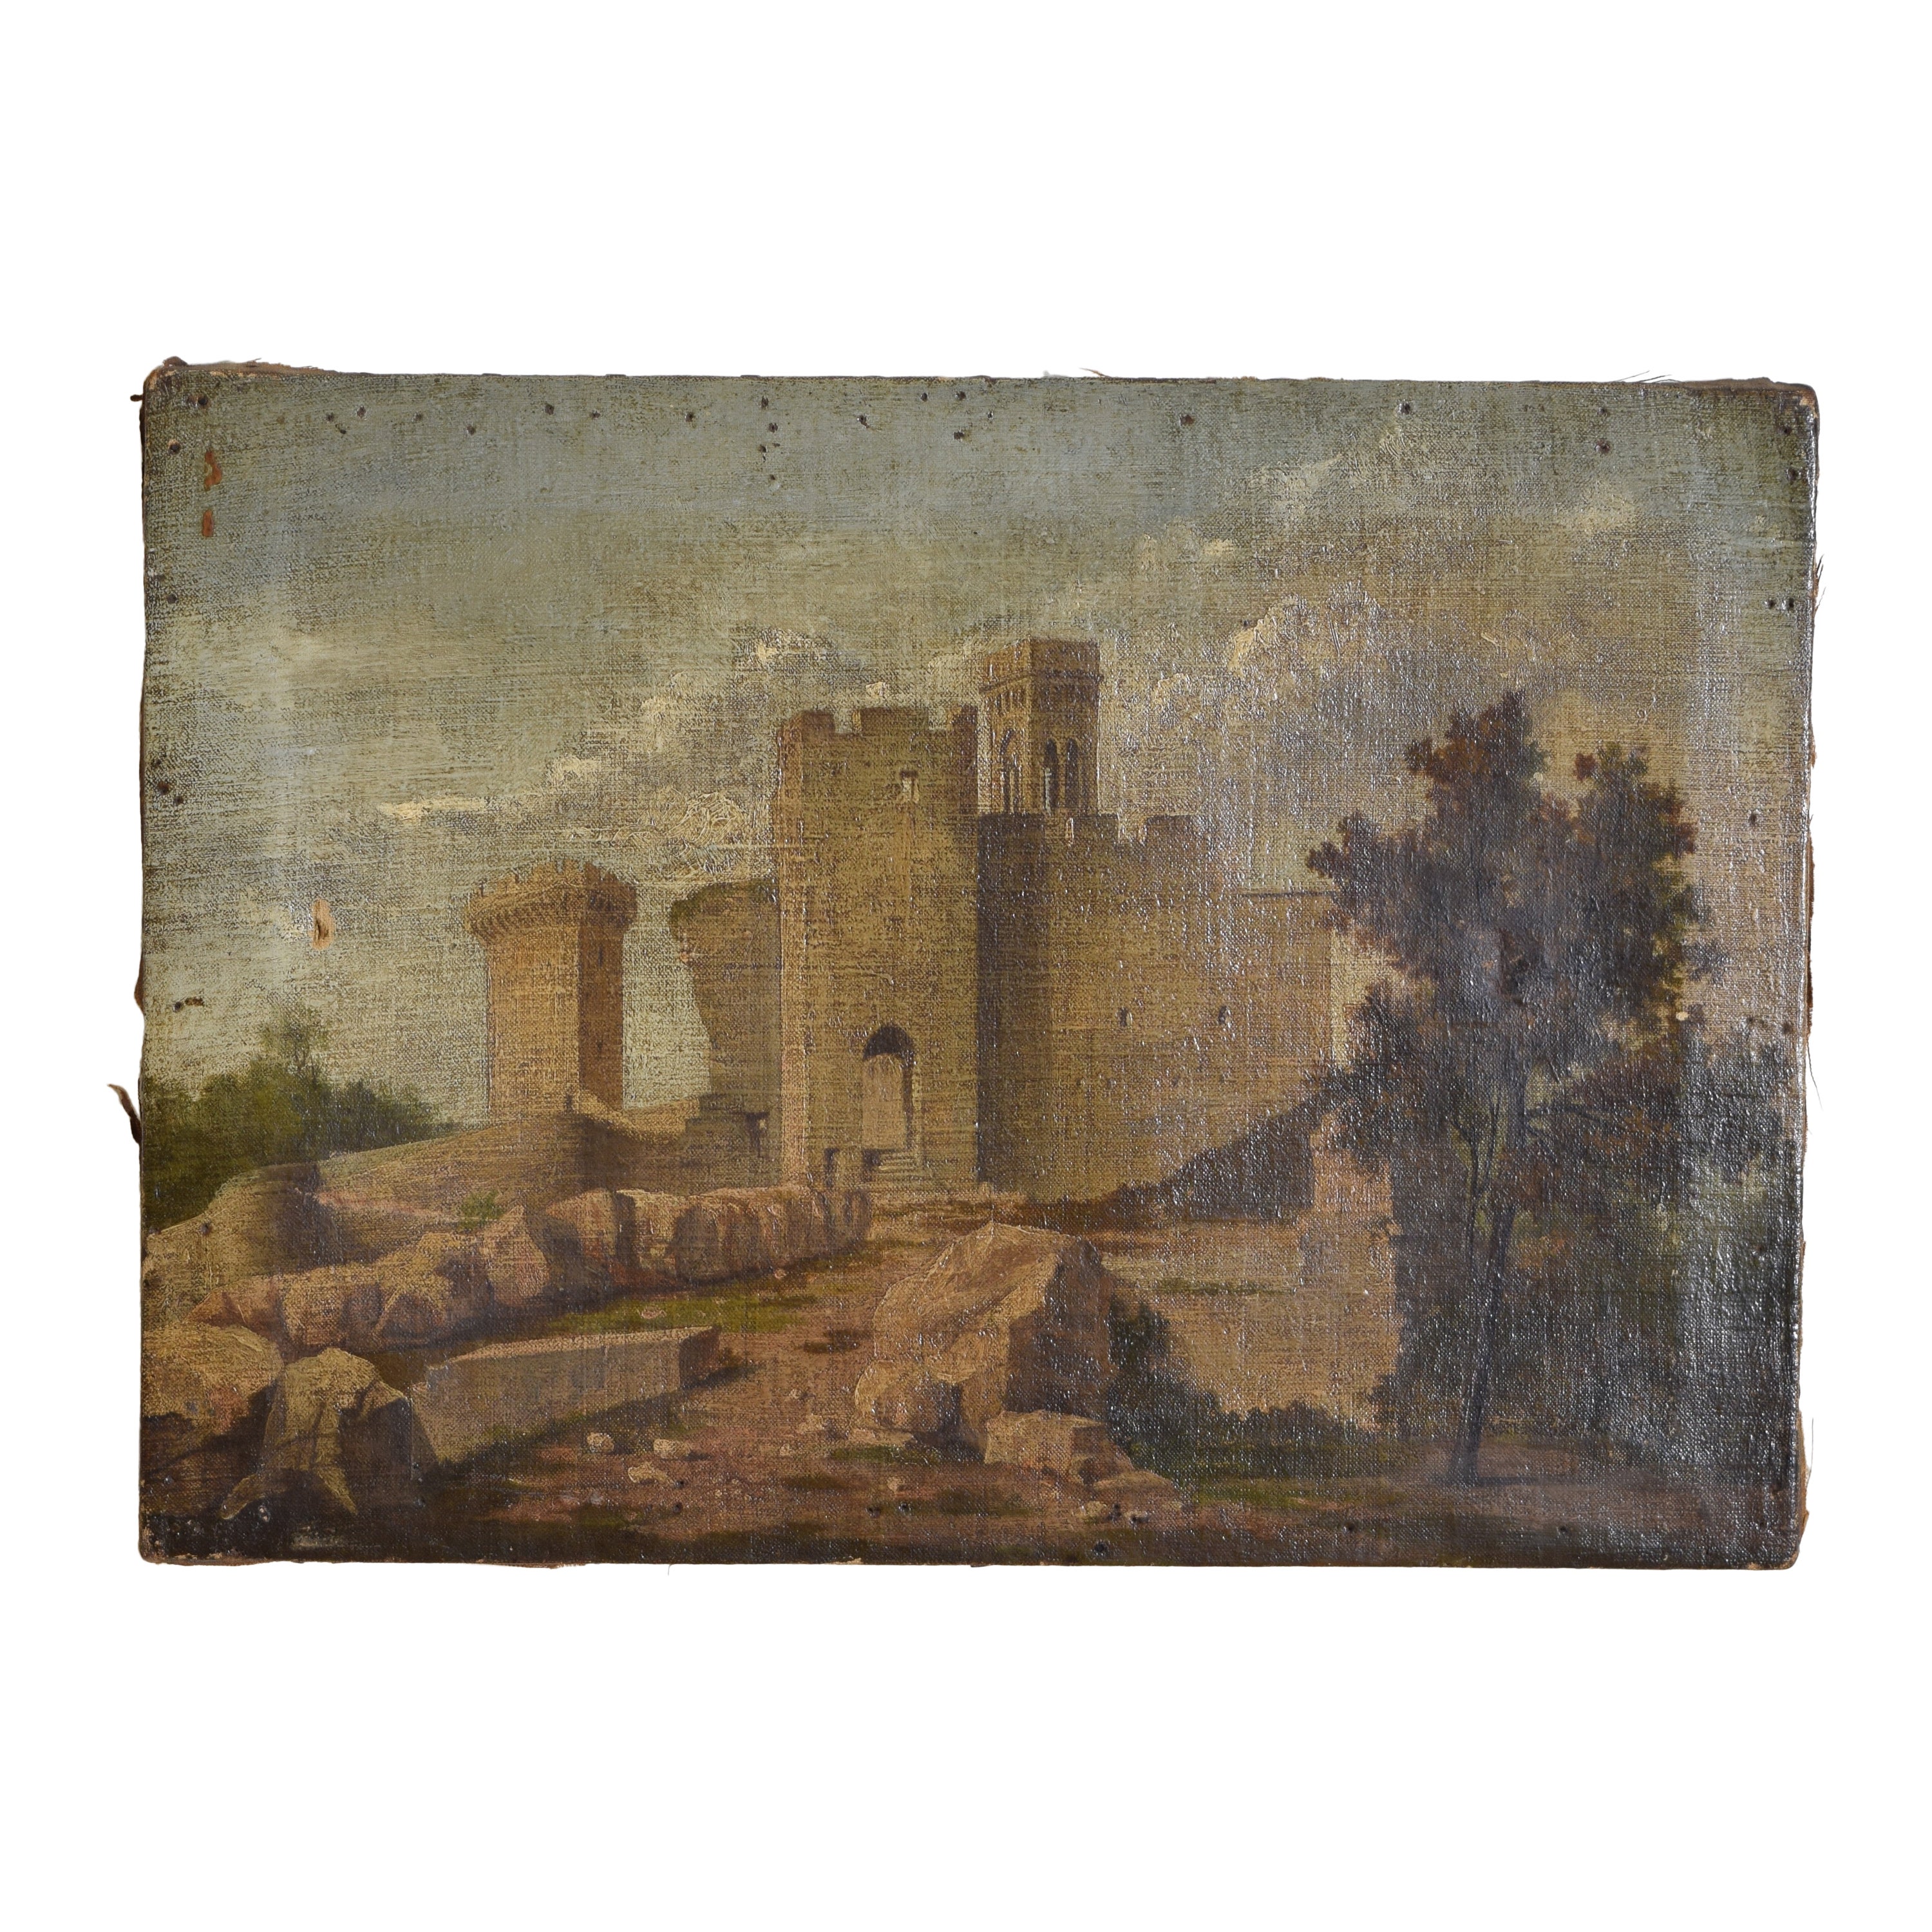 French Mid-19th Century Oil on Canvas, "Landscape with Ruins" Gibelin, Artist